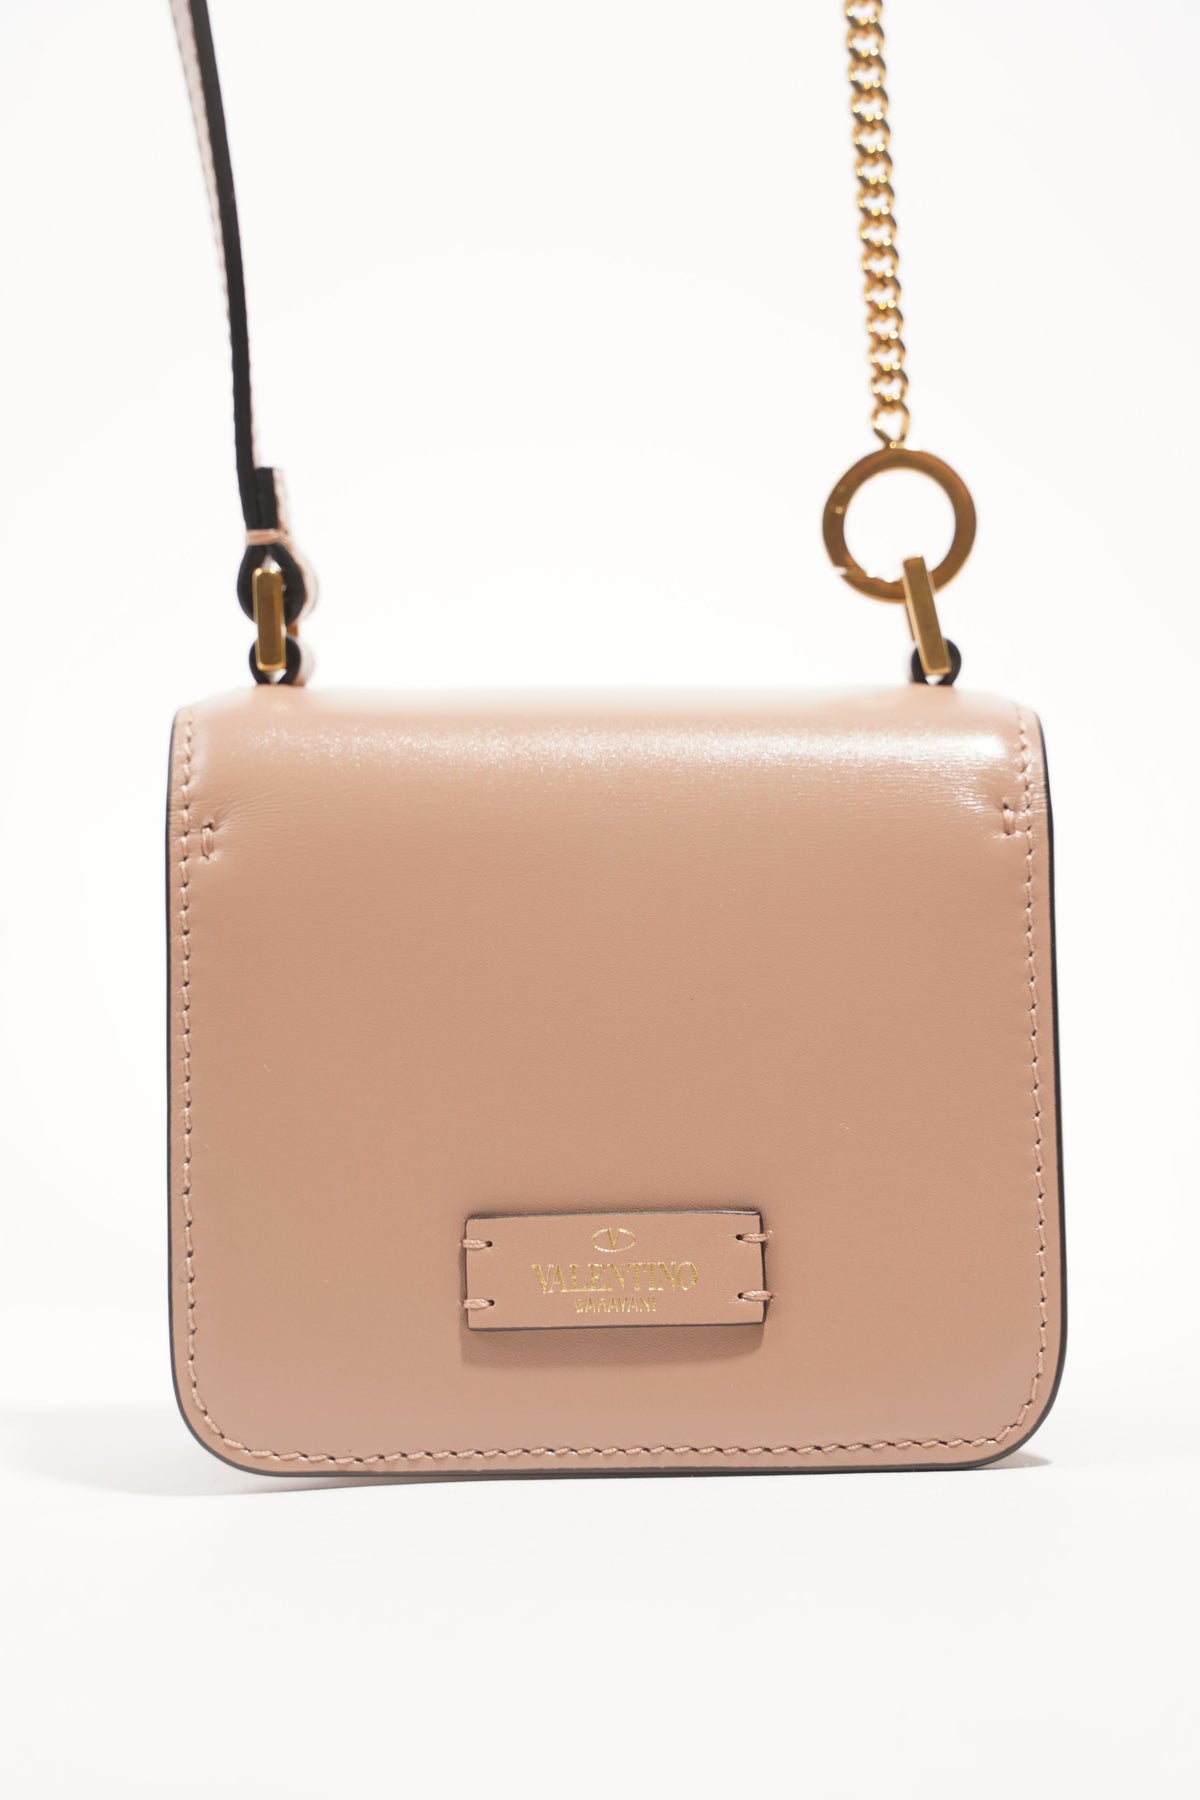 Valentino Vsling Micro Leather Shoulder Bag Women's Pink Os